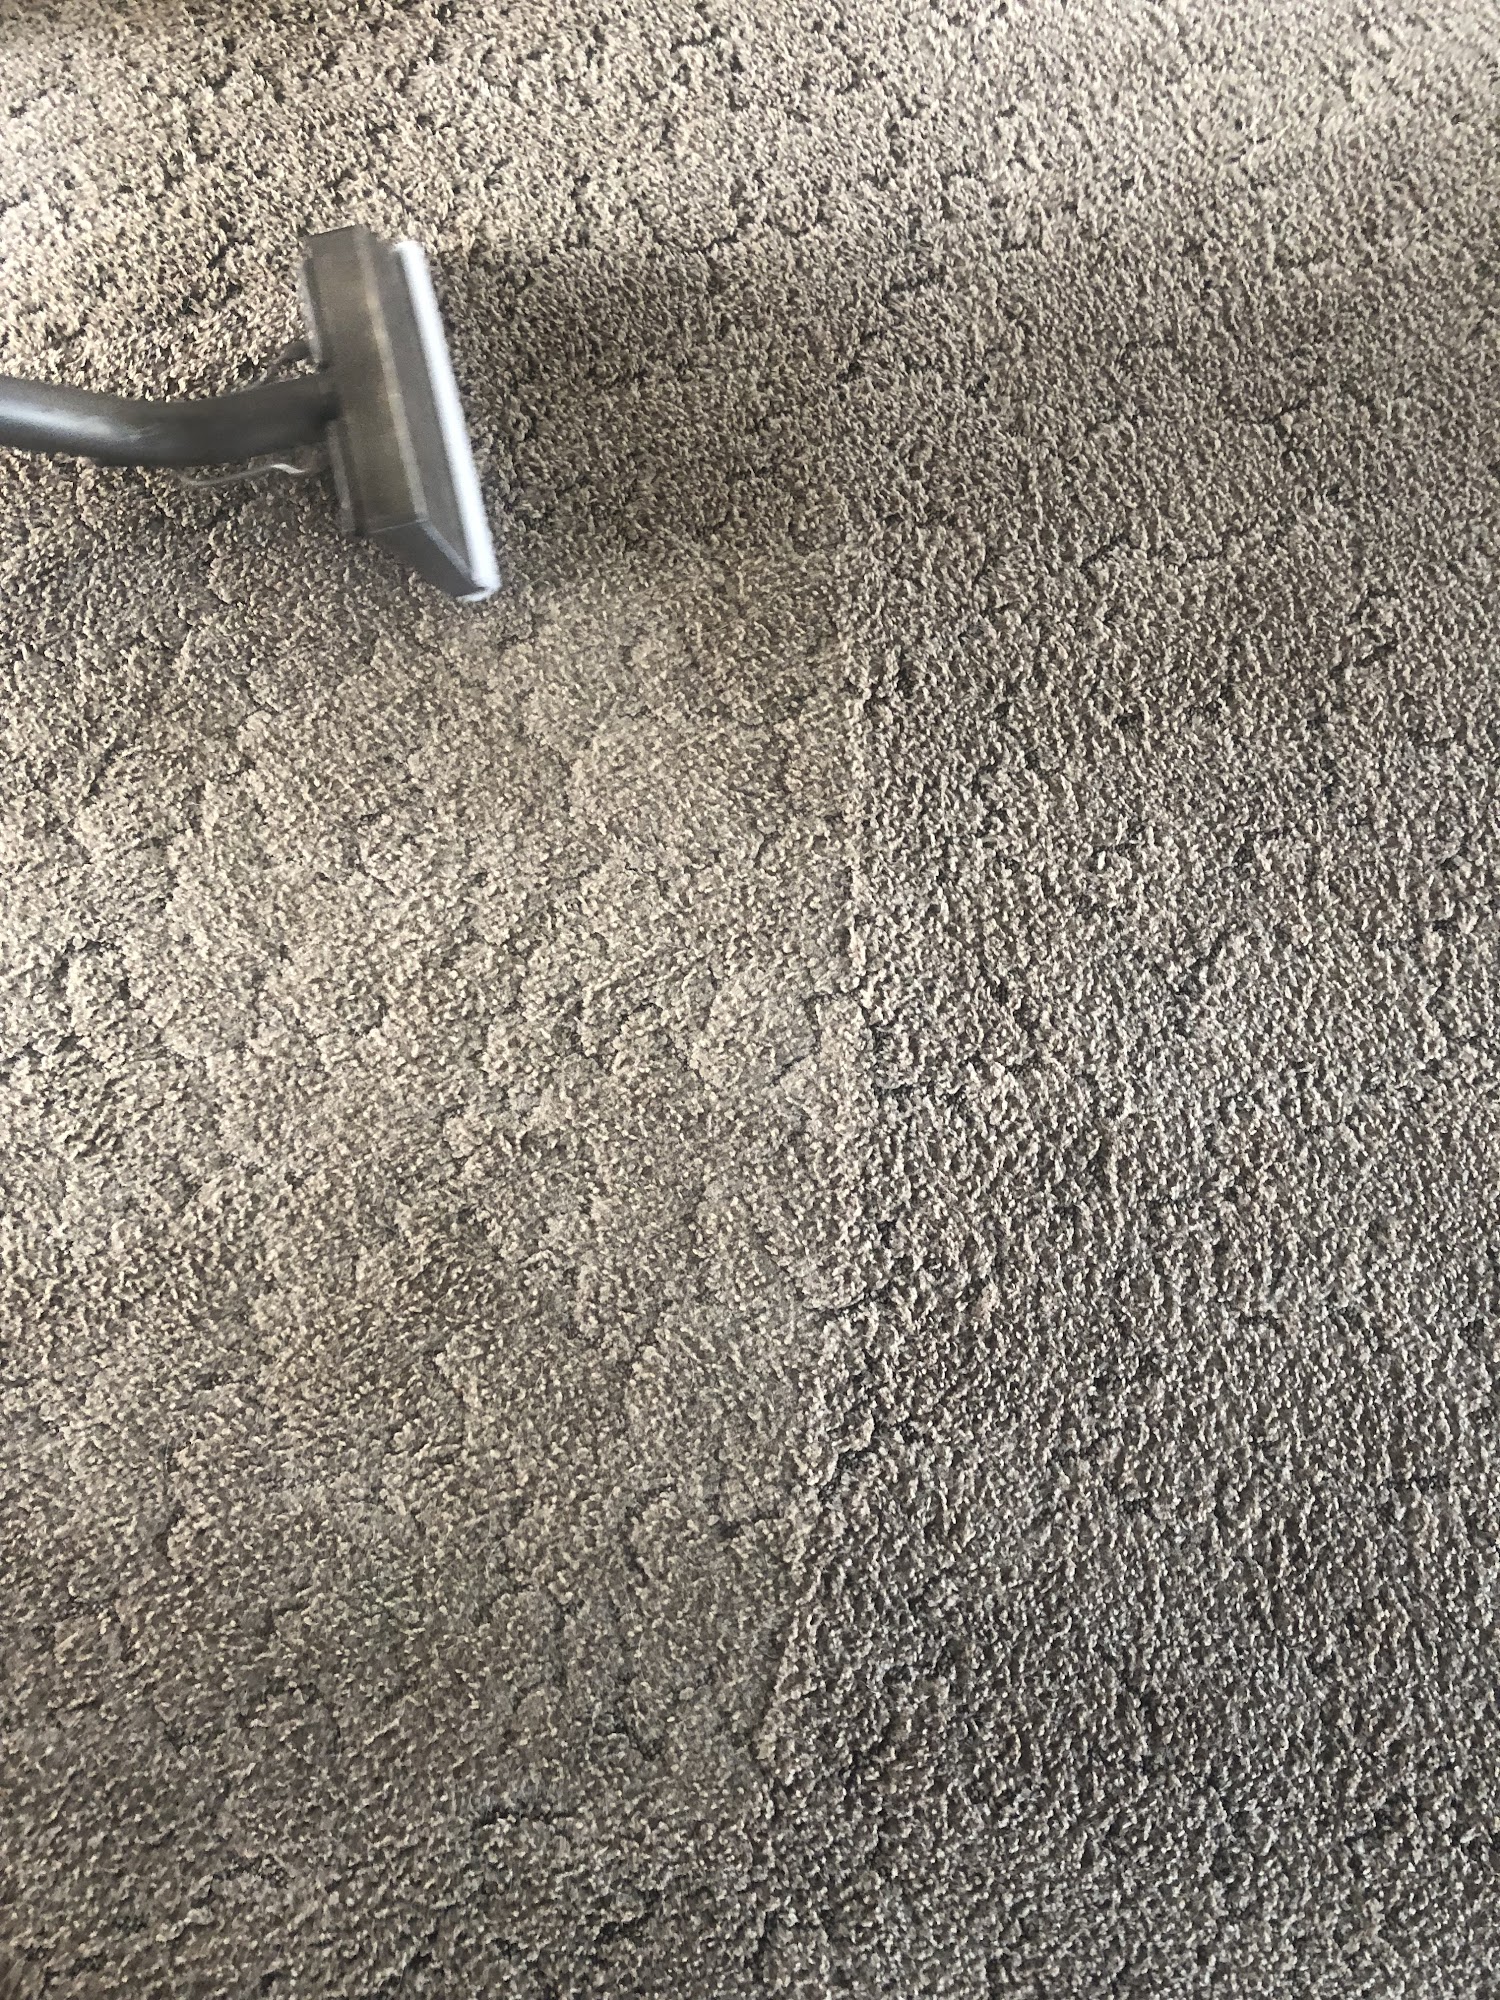 Premier Systems Carpet & Upholstery Care